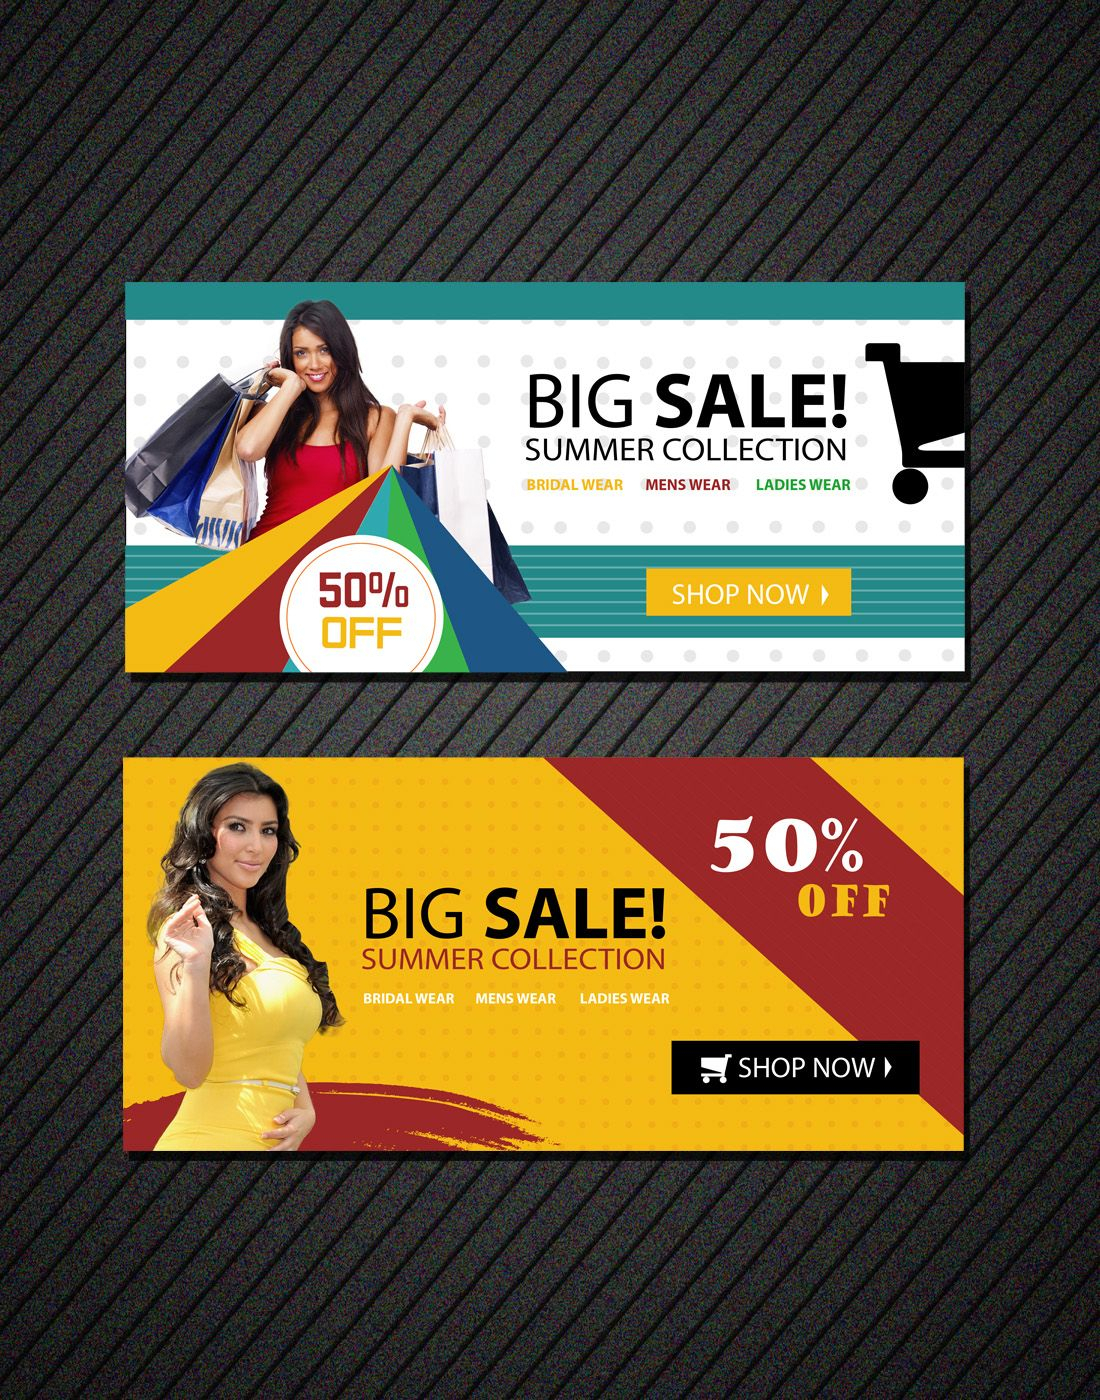 Online Shopping Banners Templates | Free Website Psd Banners Inside Free Online Banner Templates